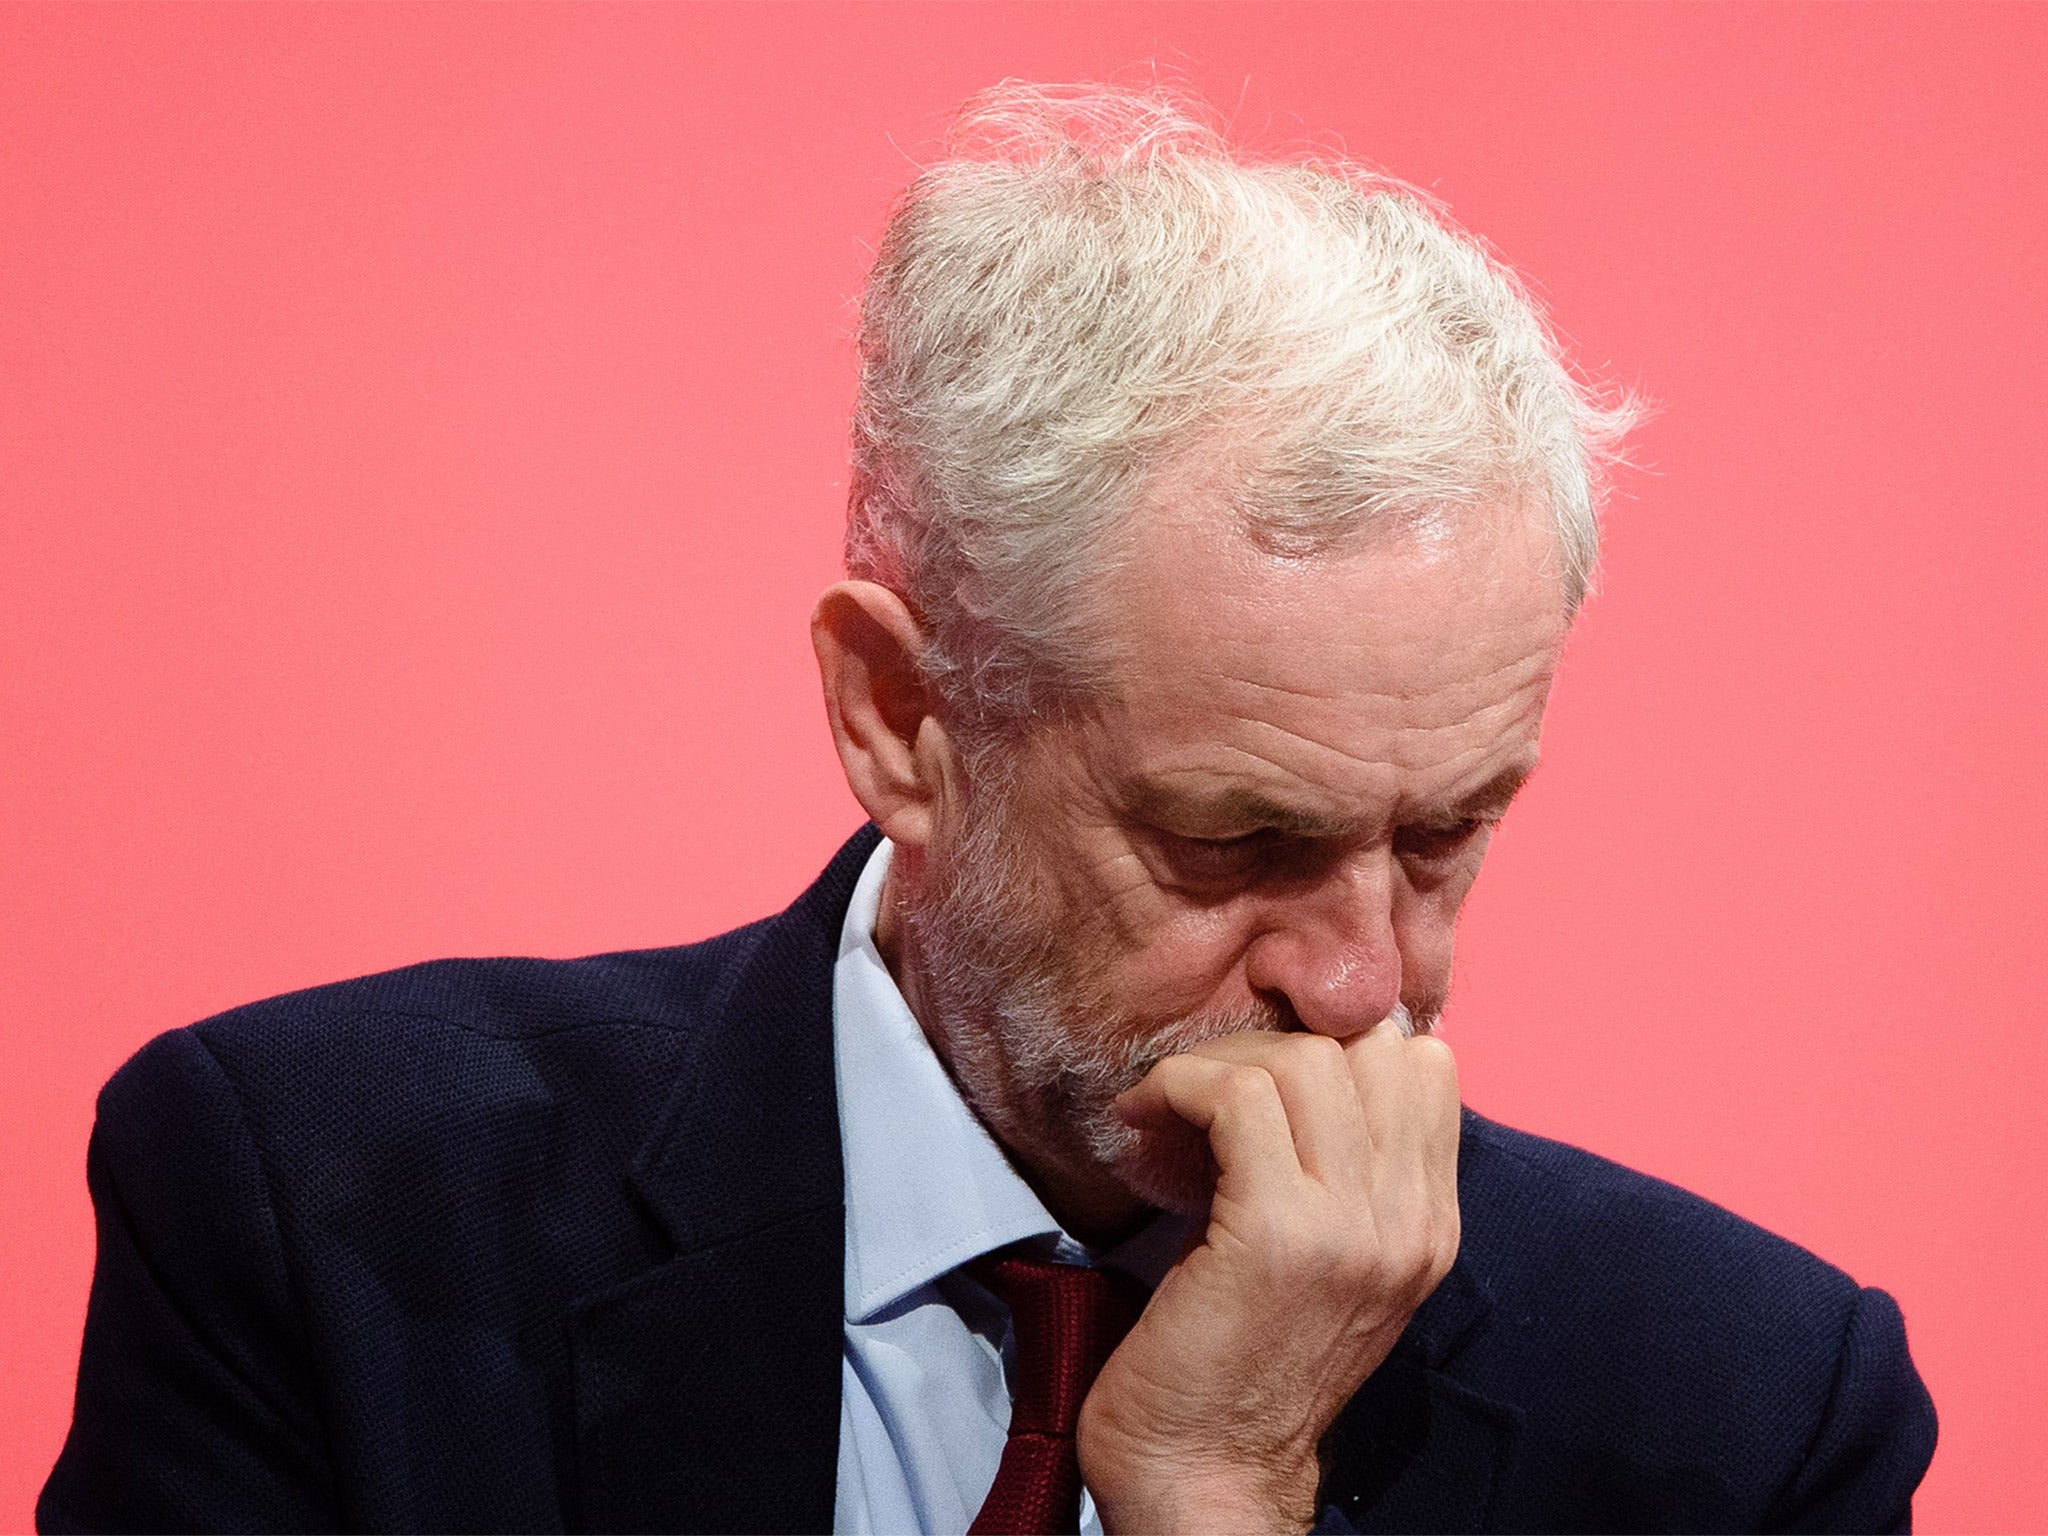 Jeremy Corbyn's reaction to suspected death of Jihadi John did not go down well with some Labour MPs